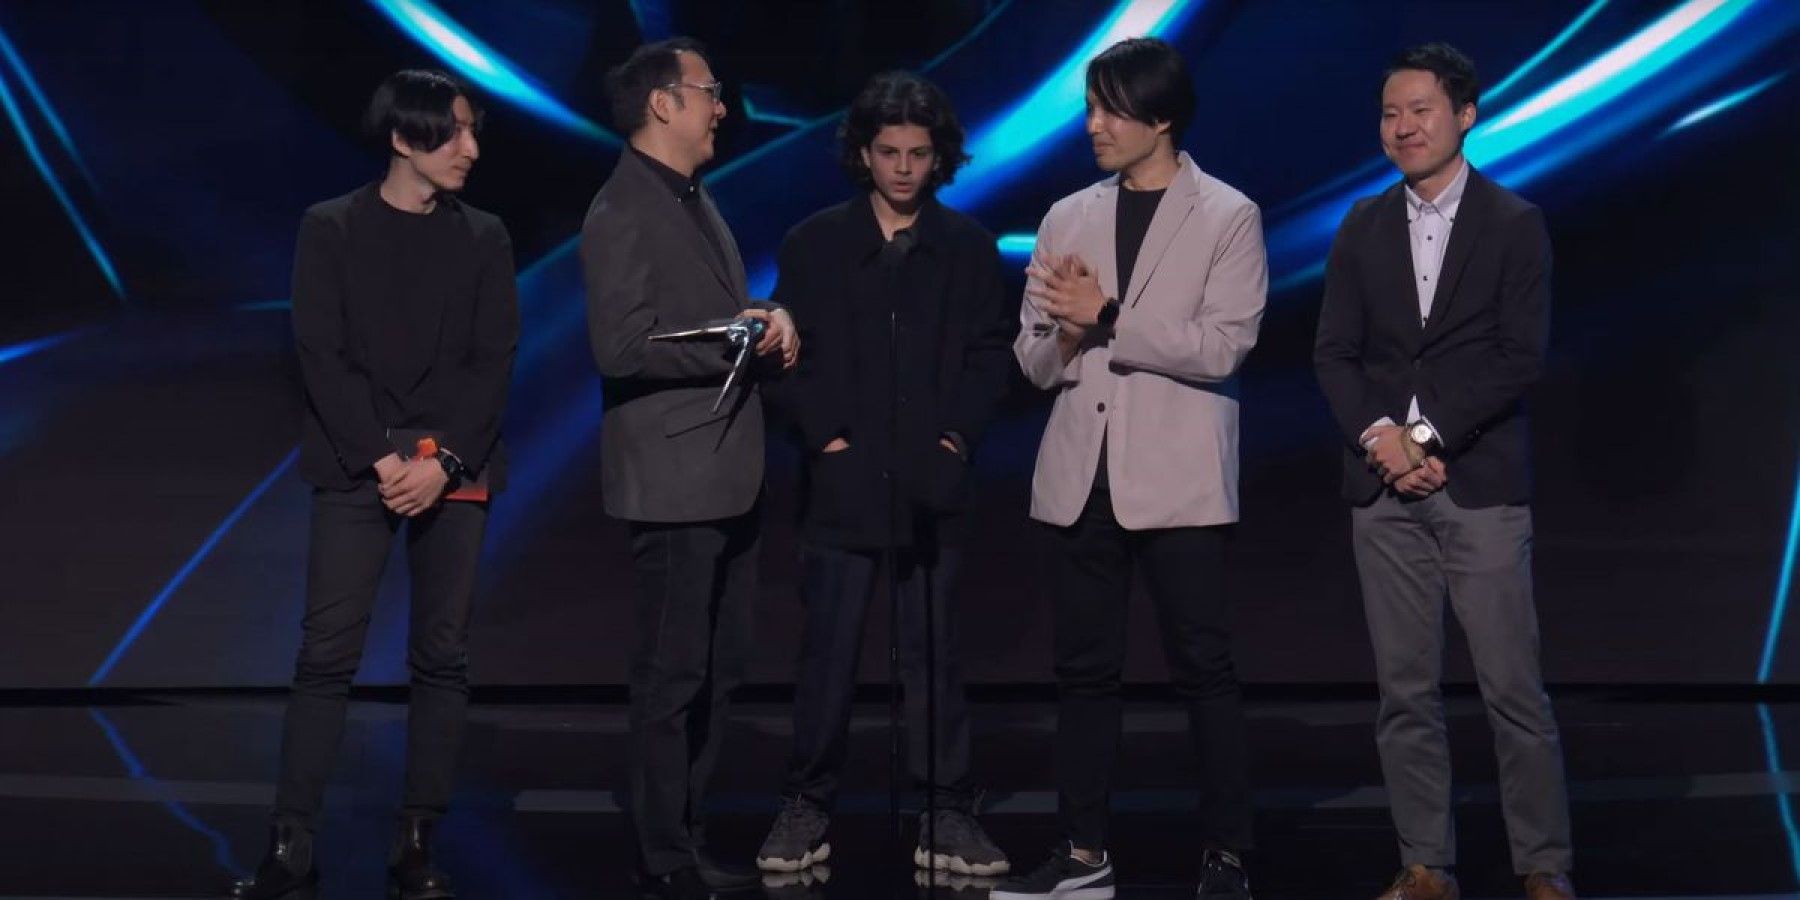 the game awards crasher matan evan on stage with elden ring developers before speaking in 2022